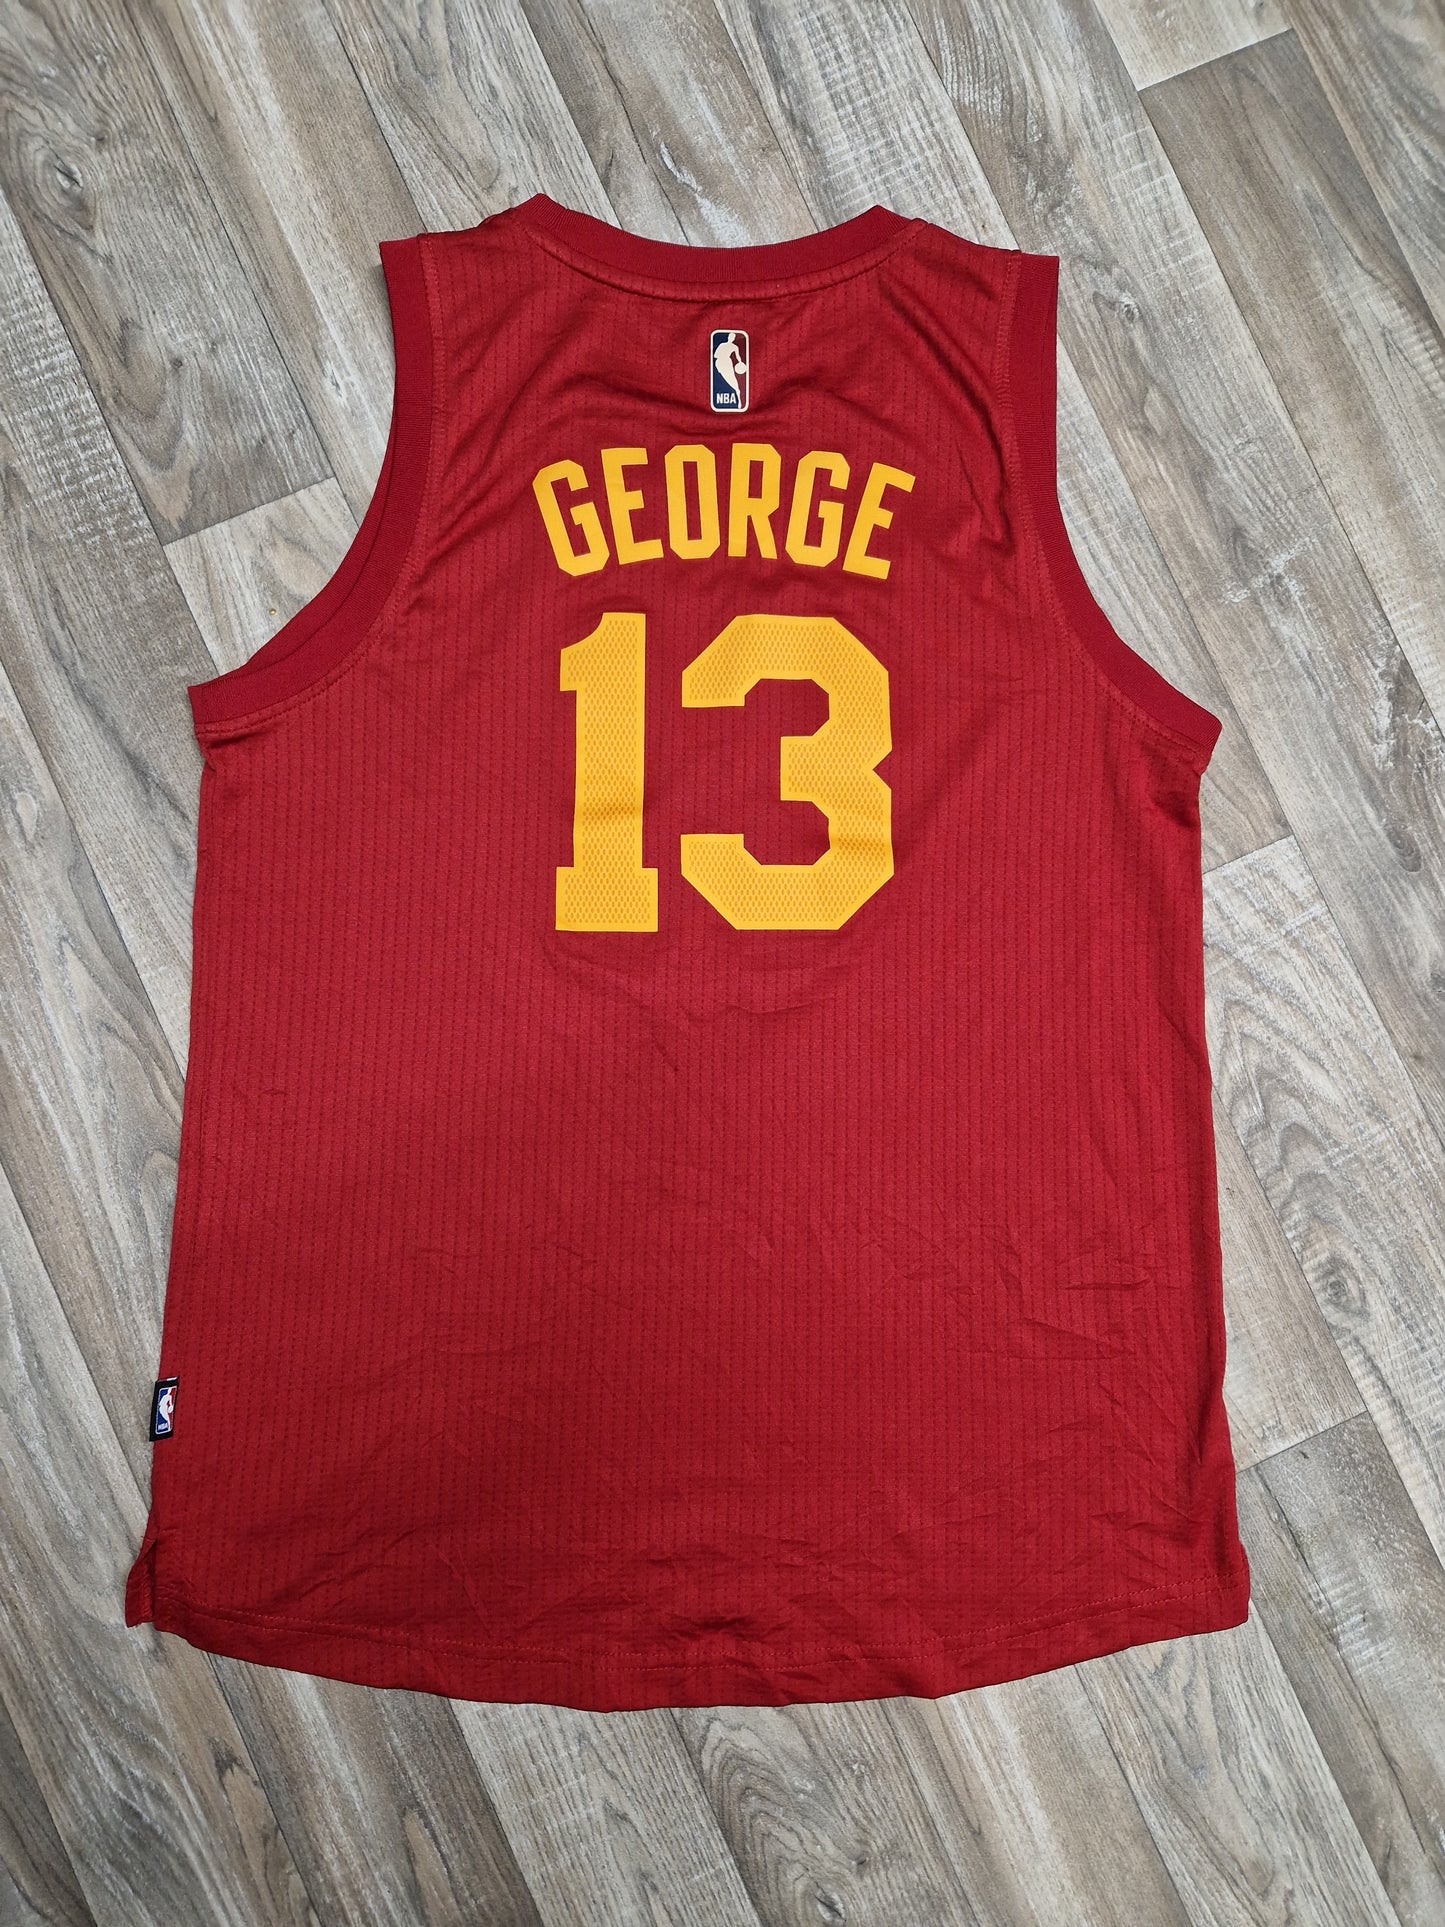 Paul George Indiana Pacers Jersey Size Medium